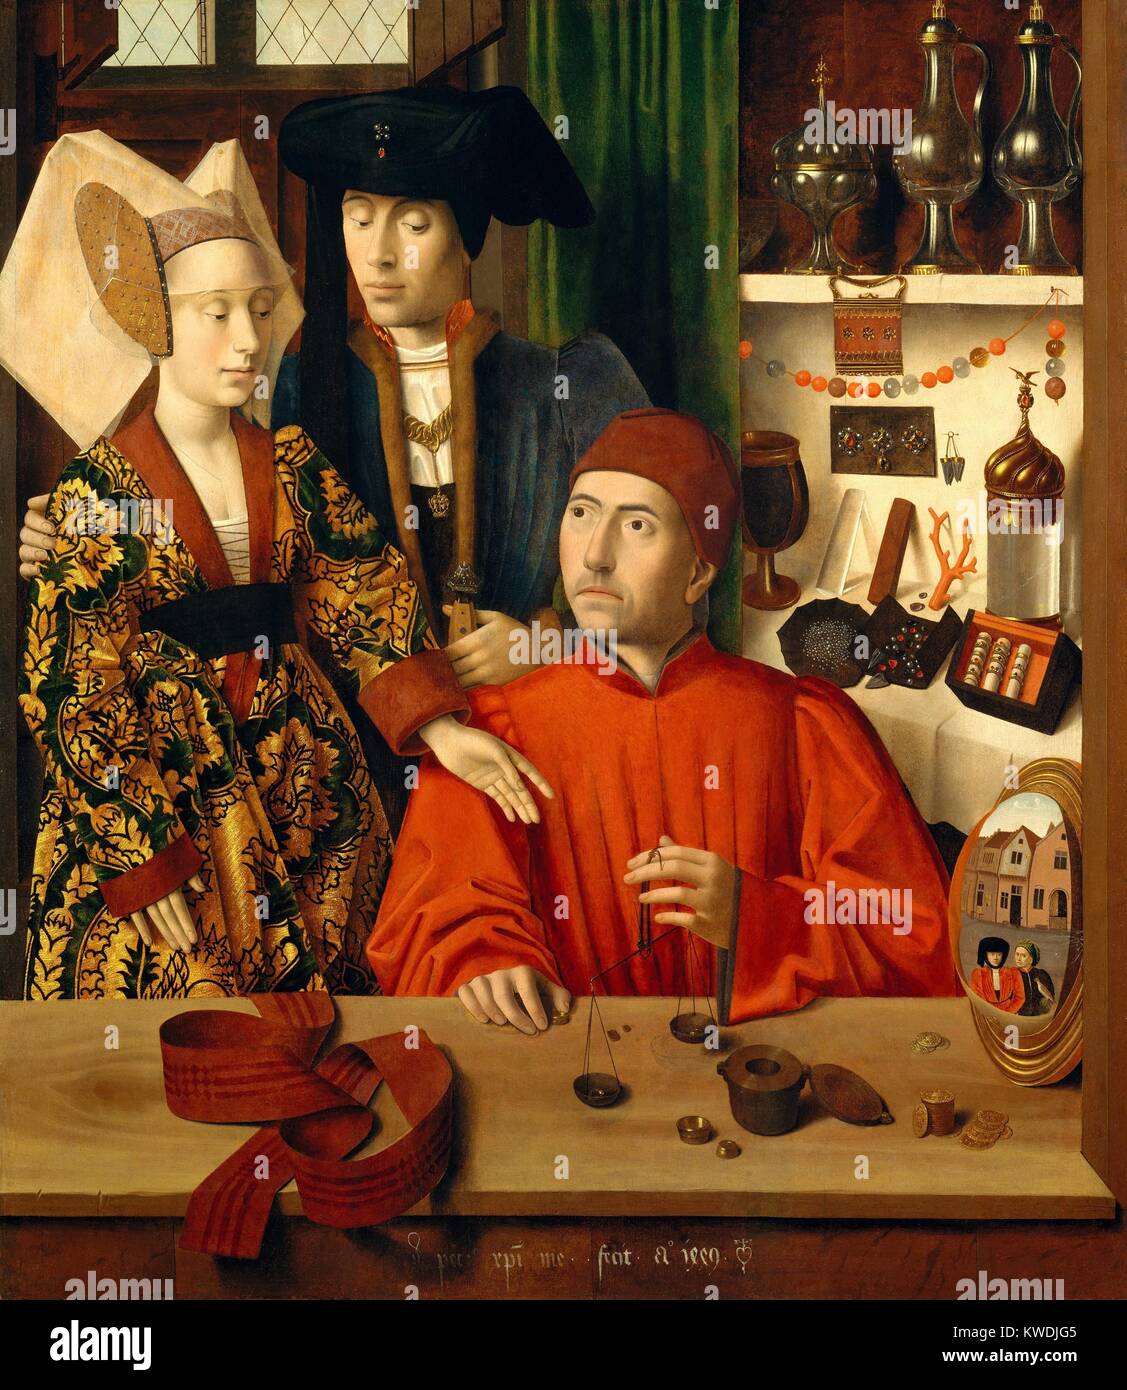 A GOLDSMITH IN HIS SHOP, by Petrus Christus, 1449, Netherlandish, Northern Renaissance oil painting. The couple are Mary of Guelders and James II, King of Scots, for whom van Vleuten has made a wedding ring that is being weighed on a scale. Philip the Good, Duke of Burgundy, also commissioned the goldsmith to create a gift for the royal couple (BSLOC 2017 16 119) Stock Photo